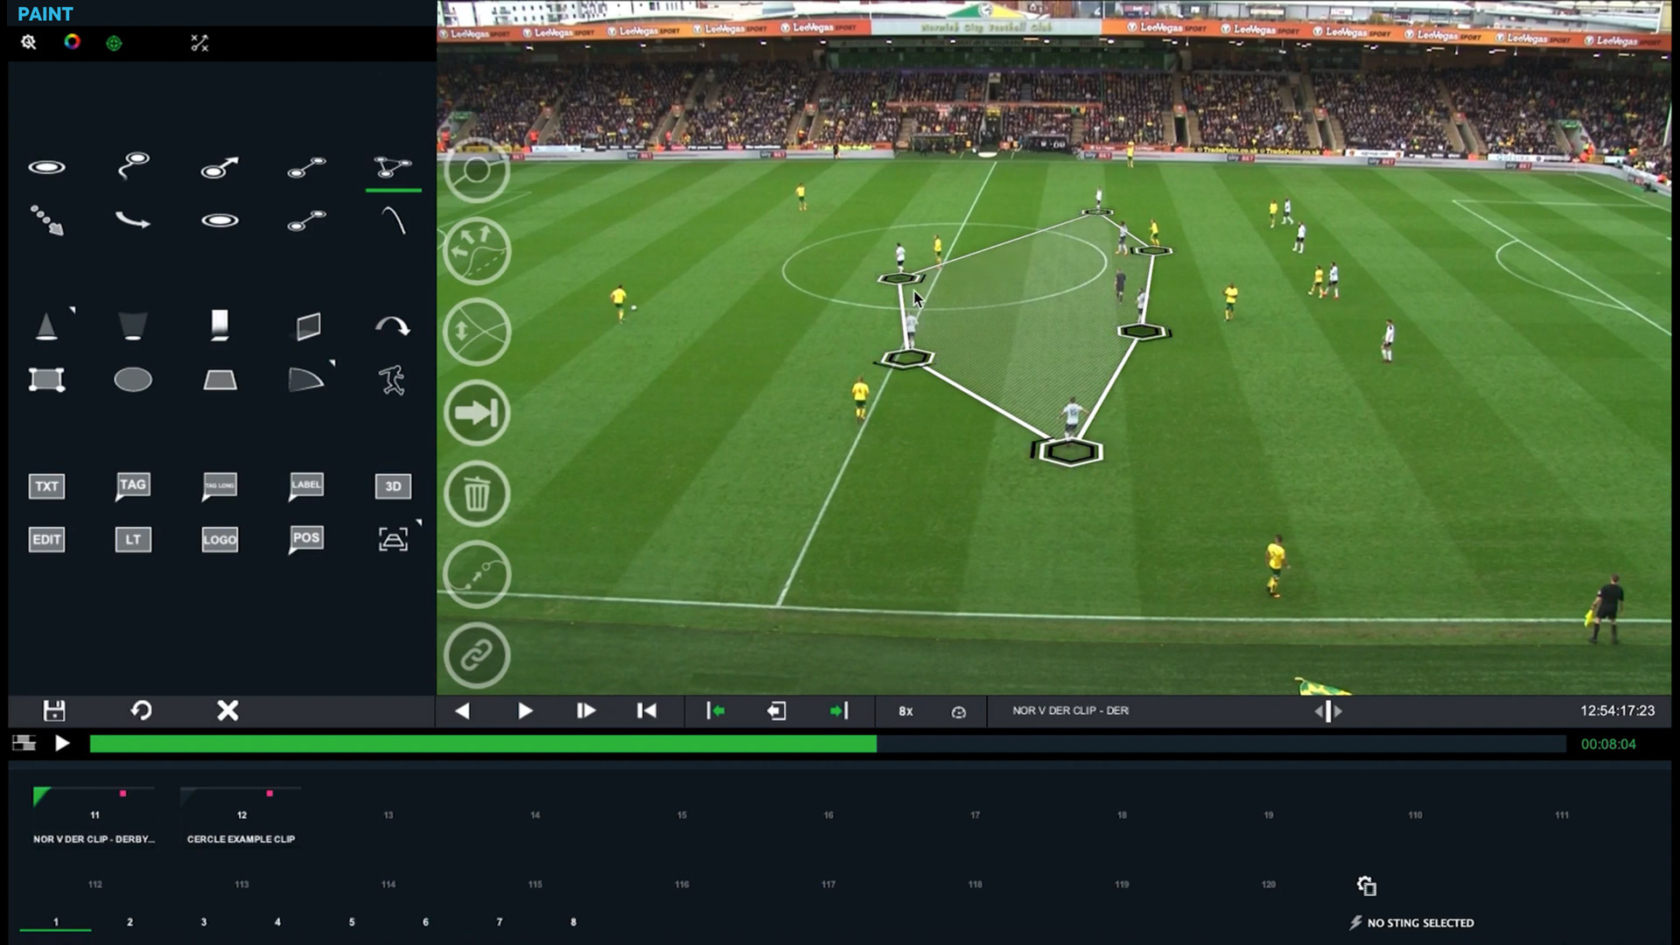 The PAINT telestrator interface for creating illustrated sports replays